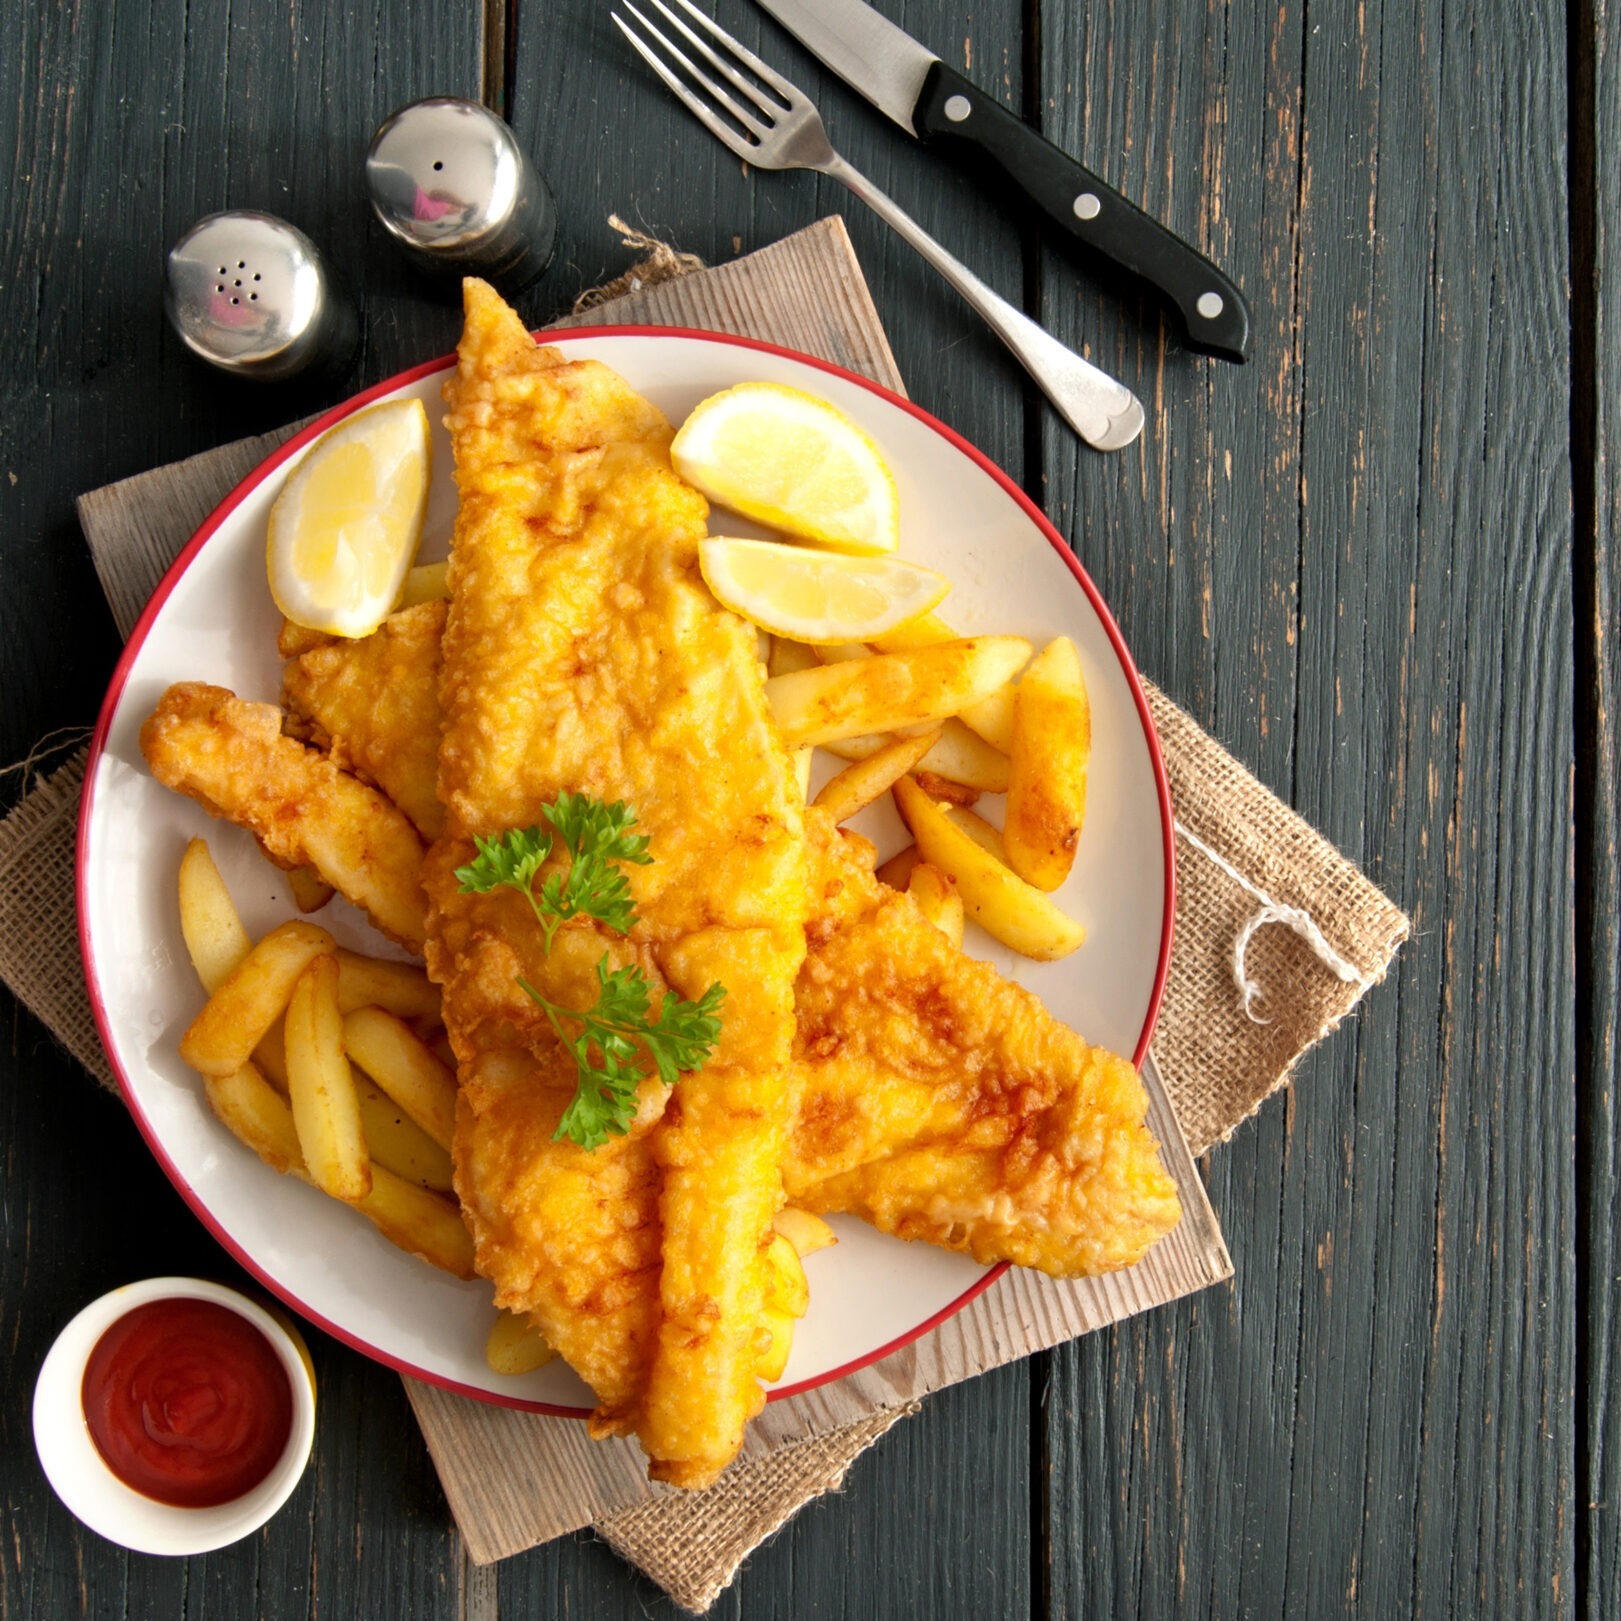 Fried fish and french fries on a plate